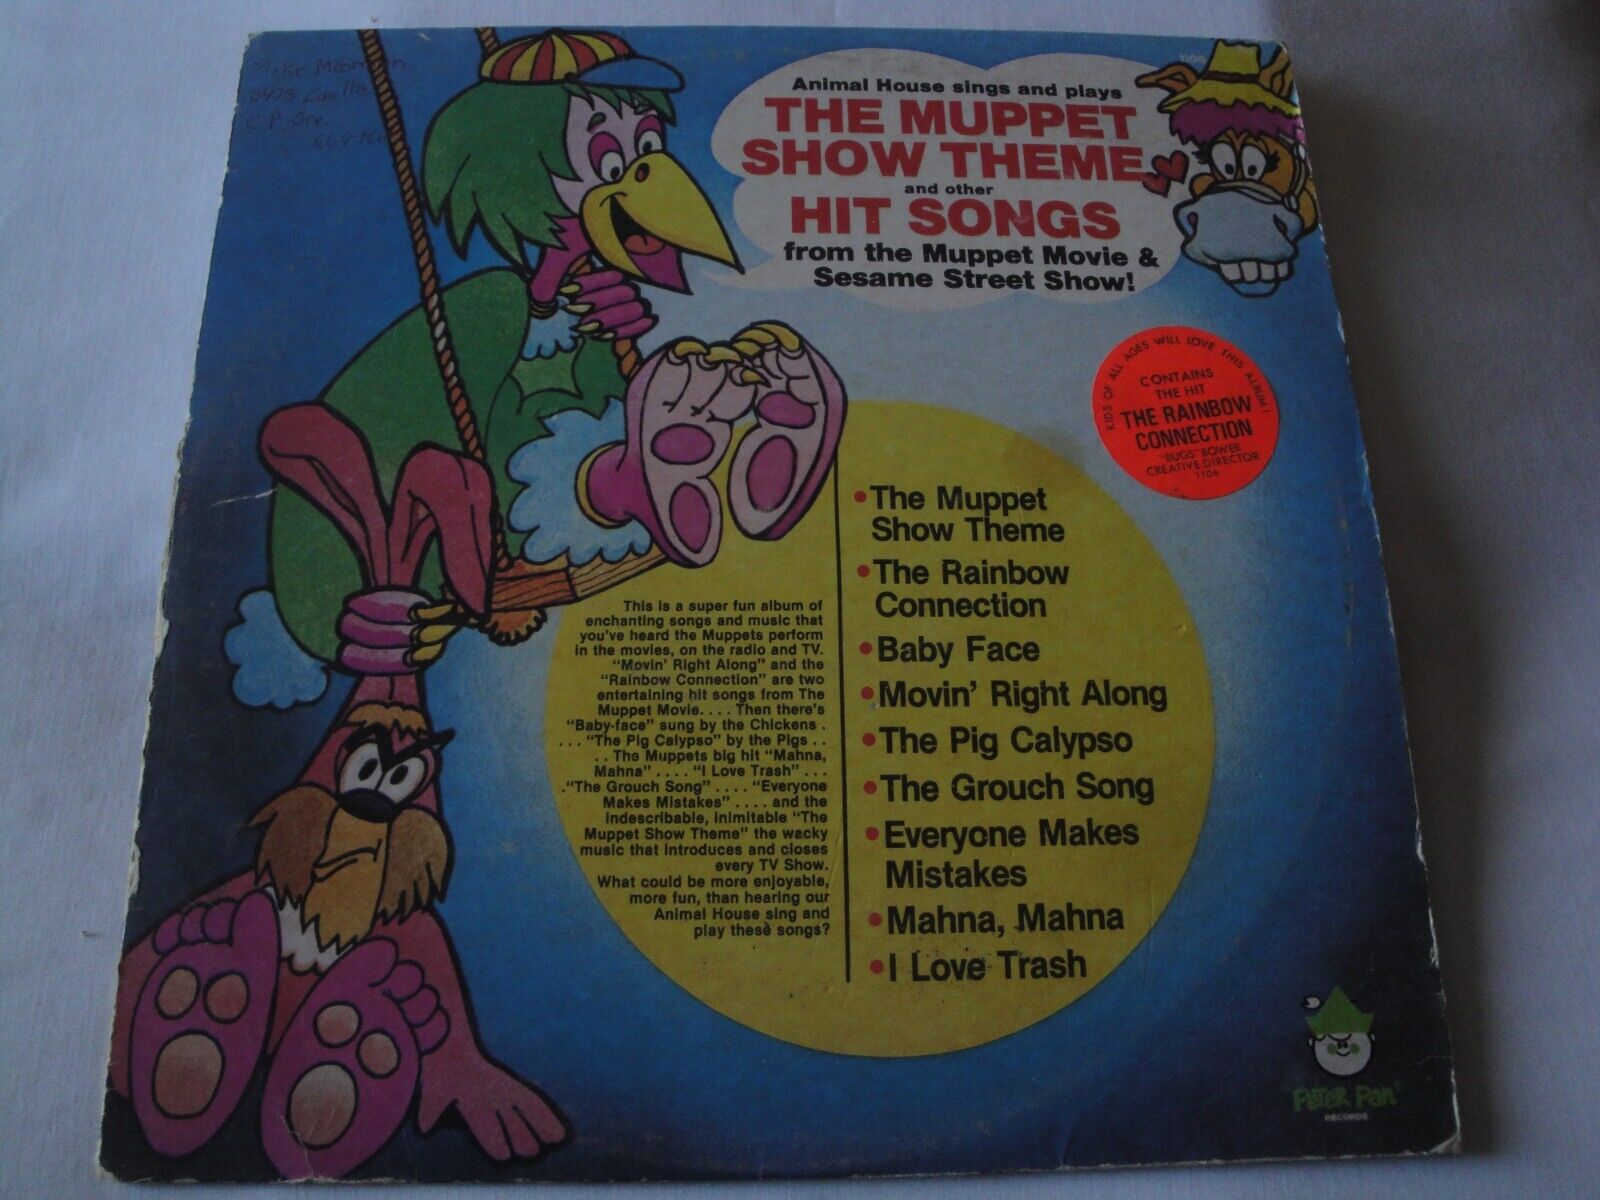 Animal House Sings And Plays Hits From The Muppet Movie & Sesame Street Vinyl LP